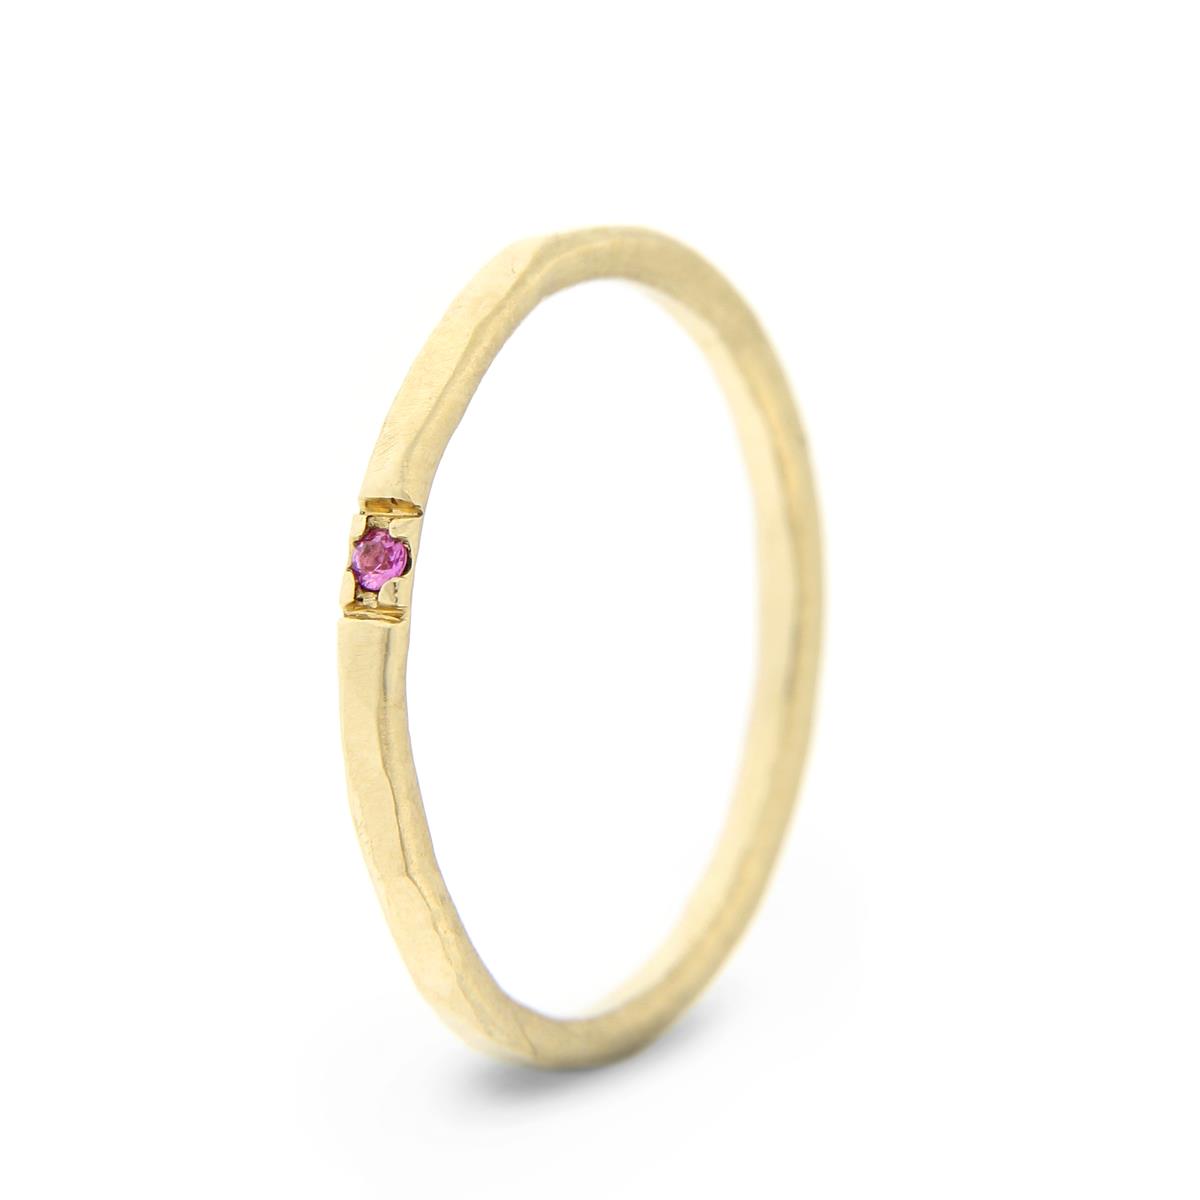 Katie g. Jewellery_Hammered Ring 1,5mm -  14kt. Champagnergold - rosa Saphir